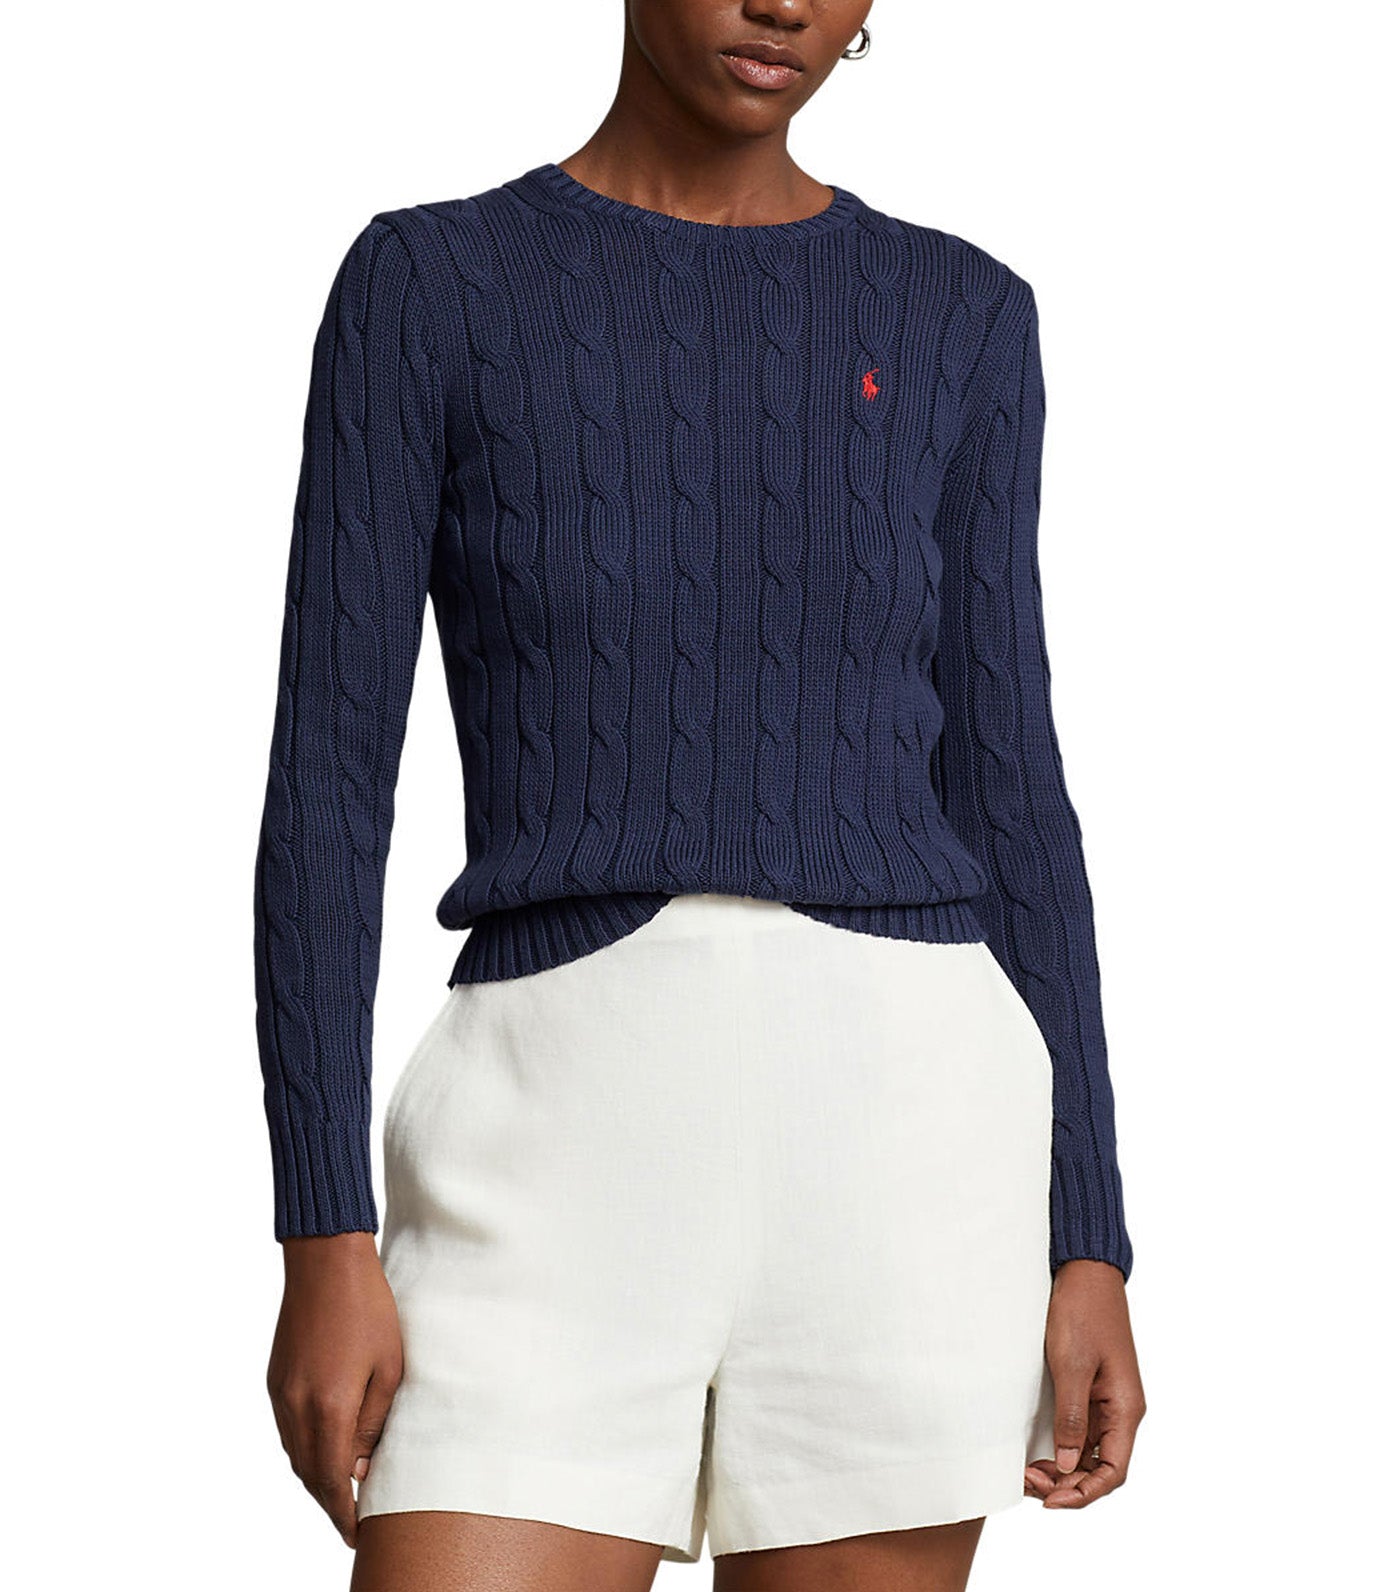 Women's Cable-Knit Cotton Crewneck Sweater Hunter Navy